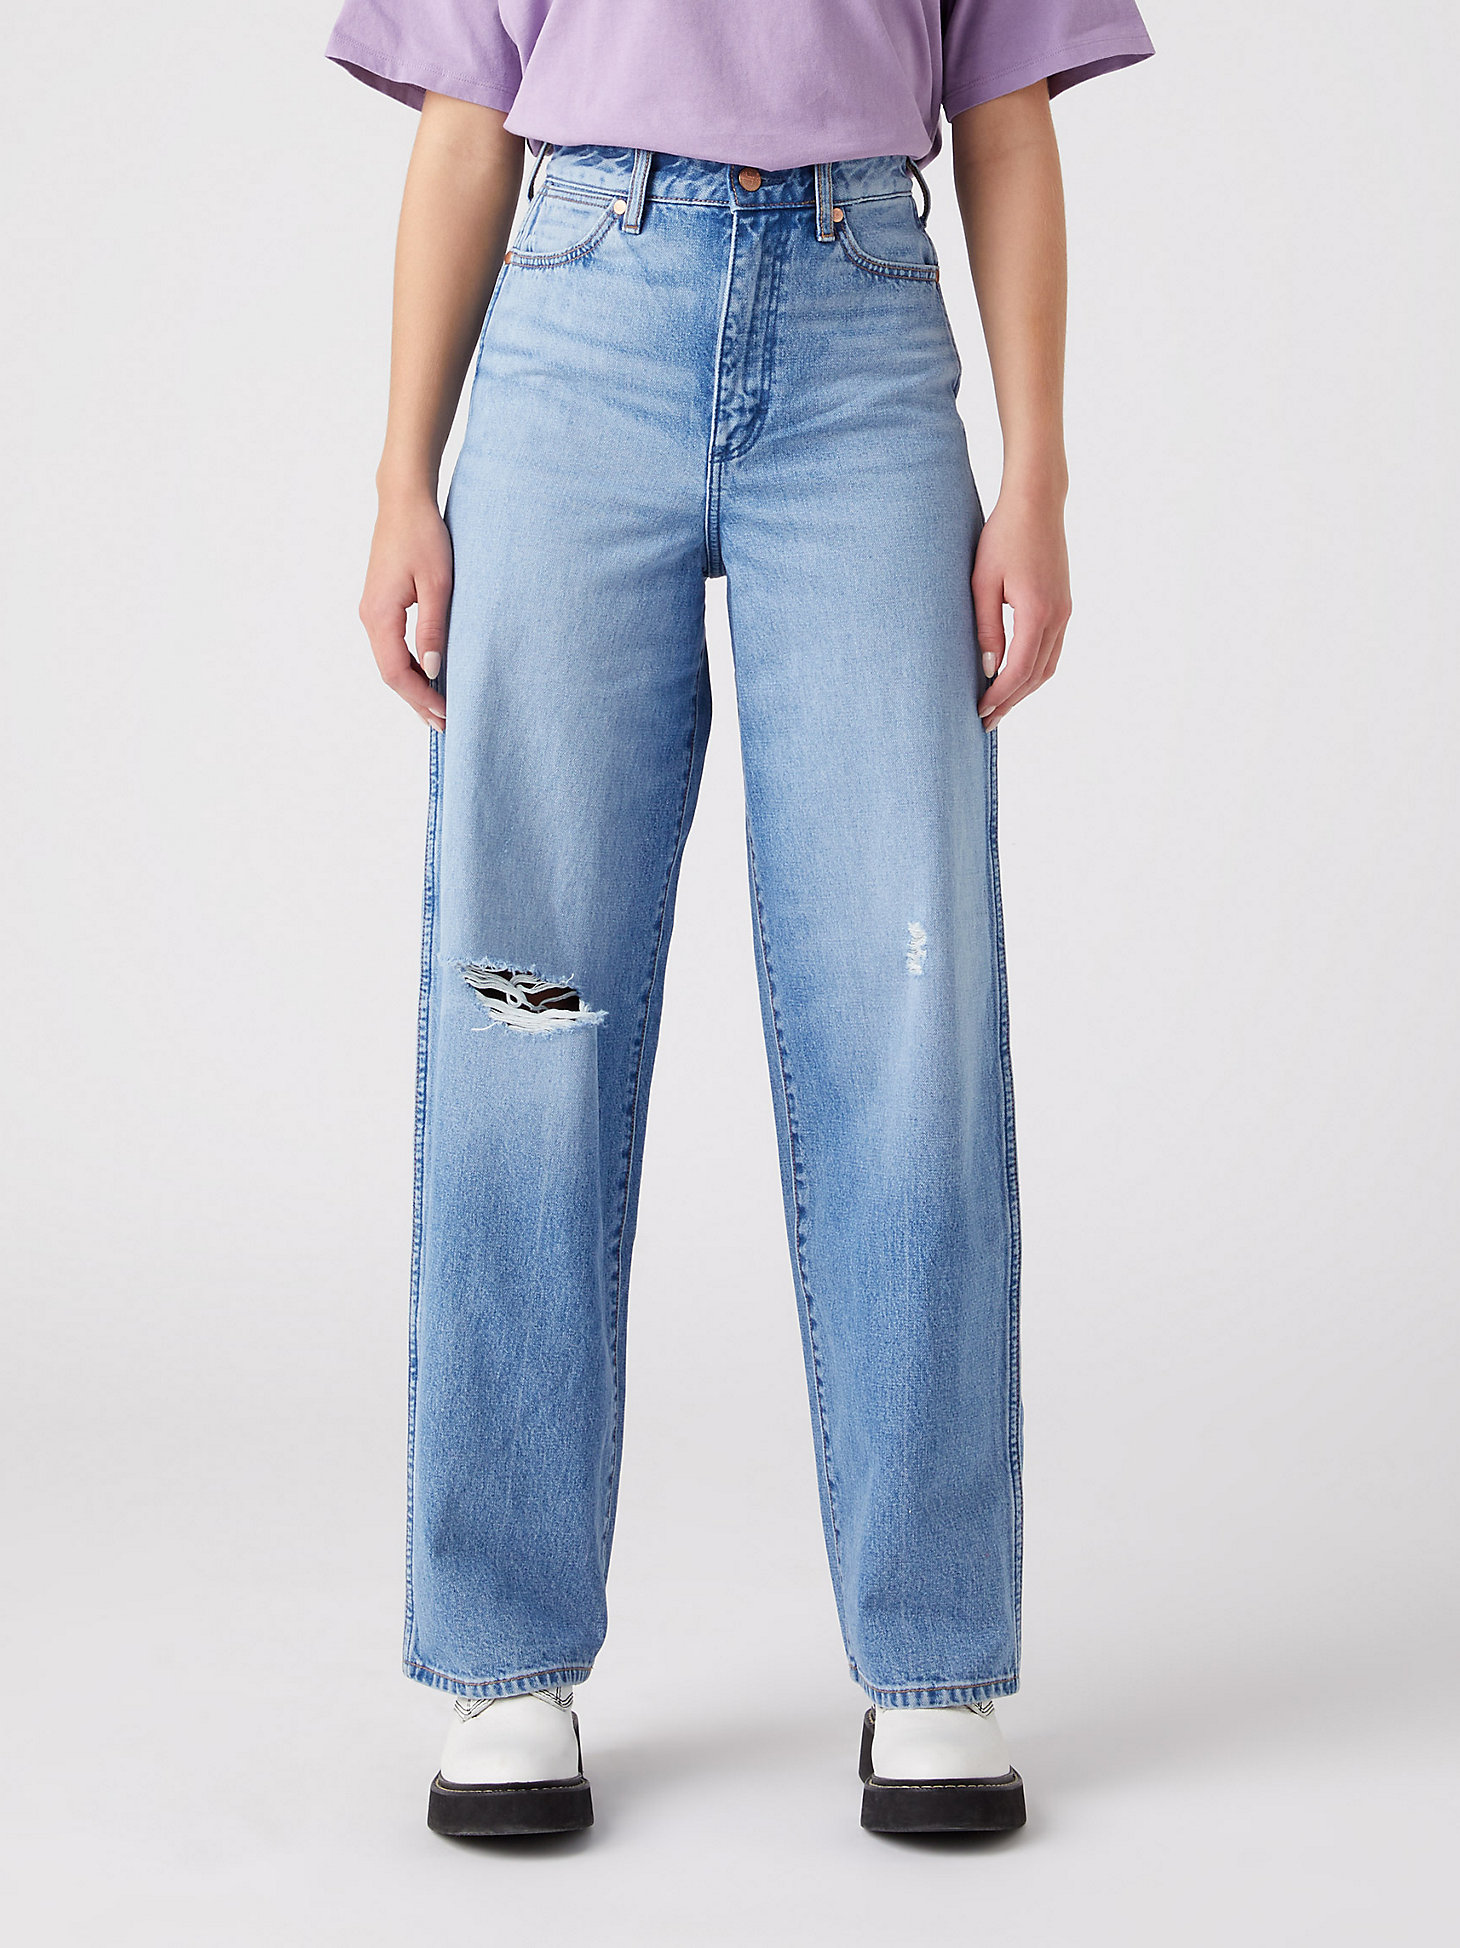 Women's Relaxed Mom Jean in Patty main view